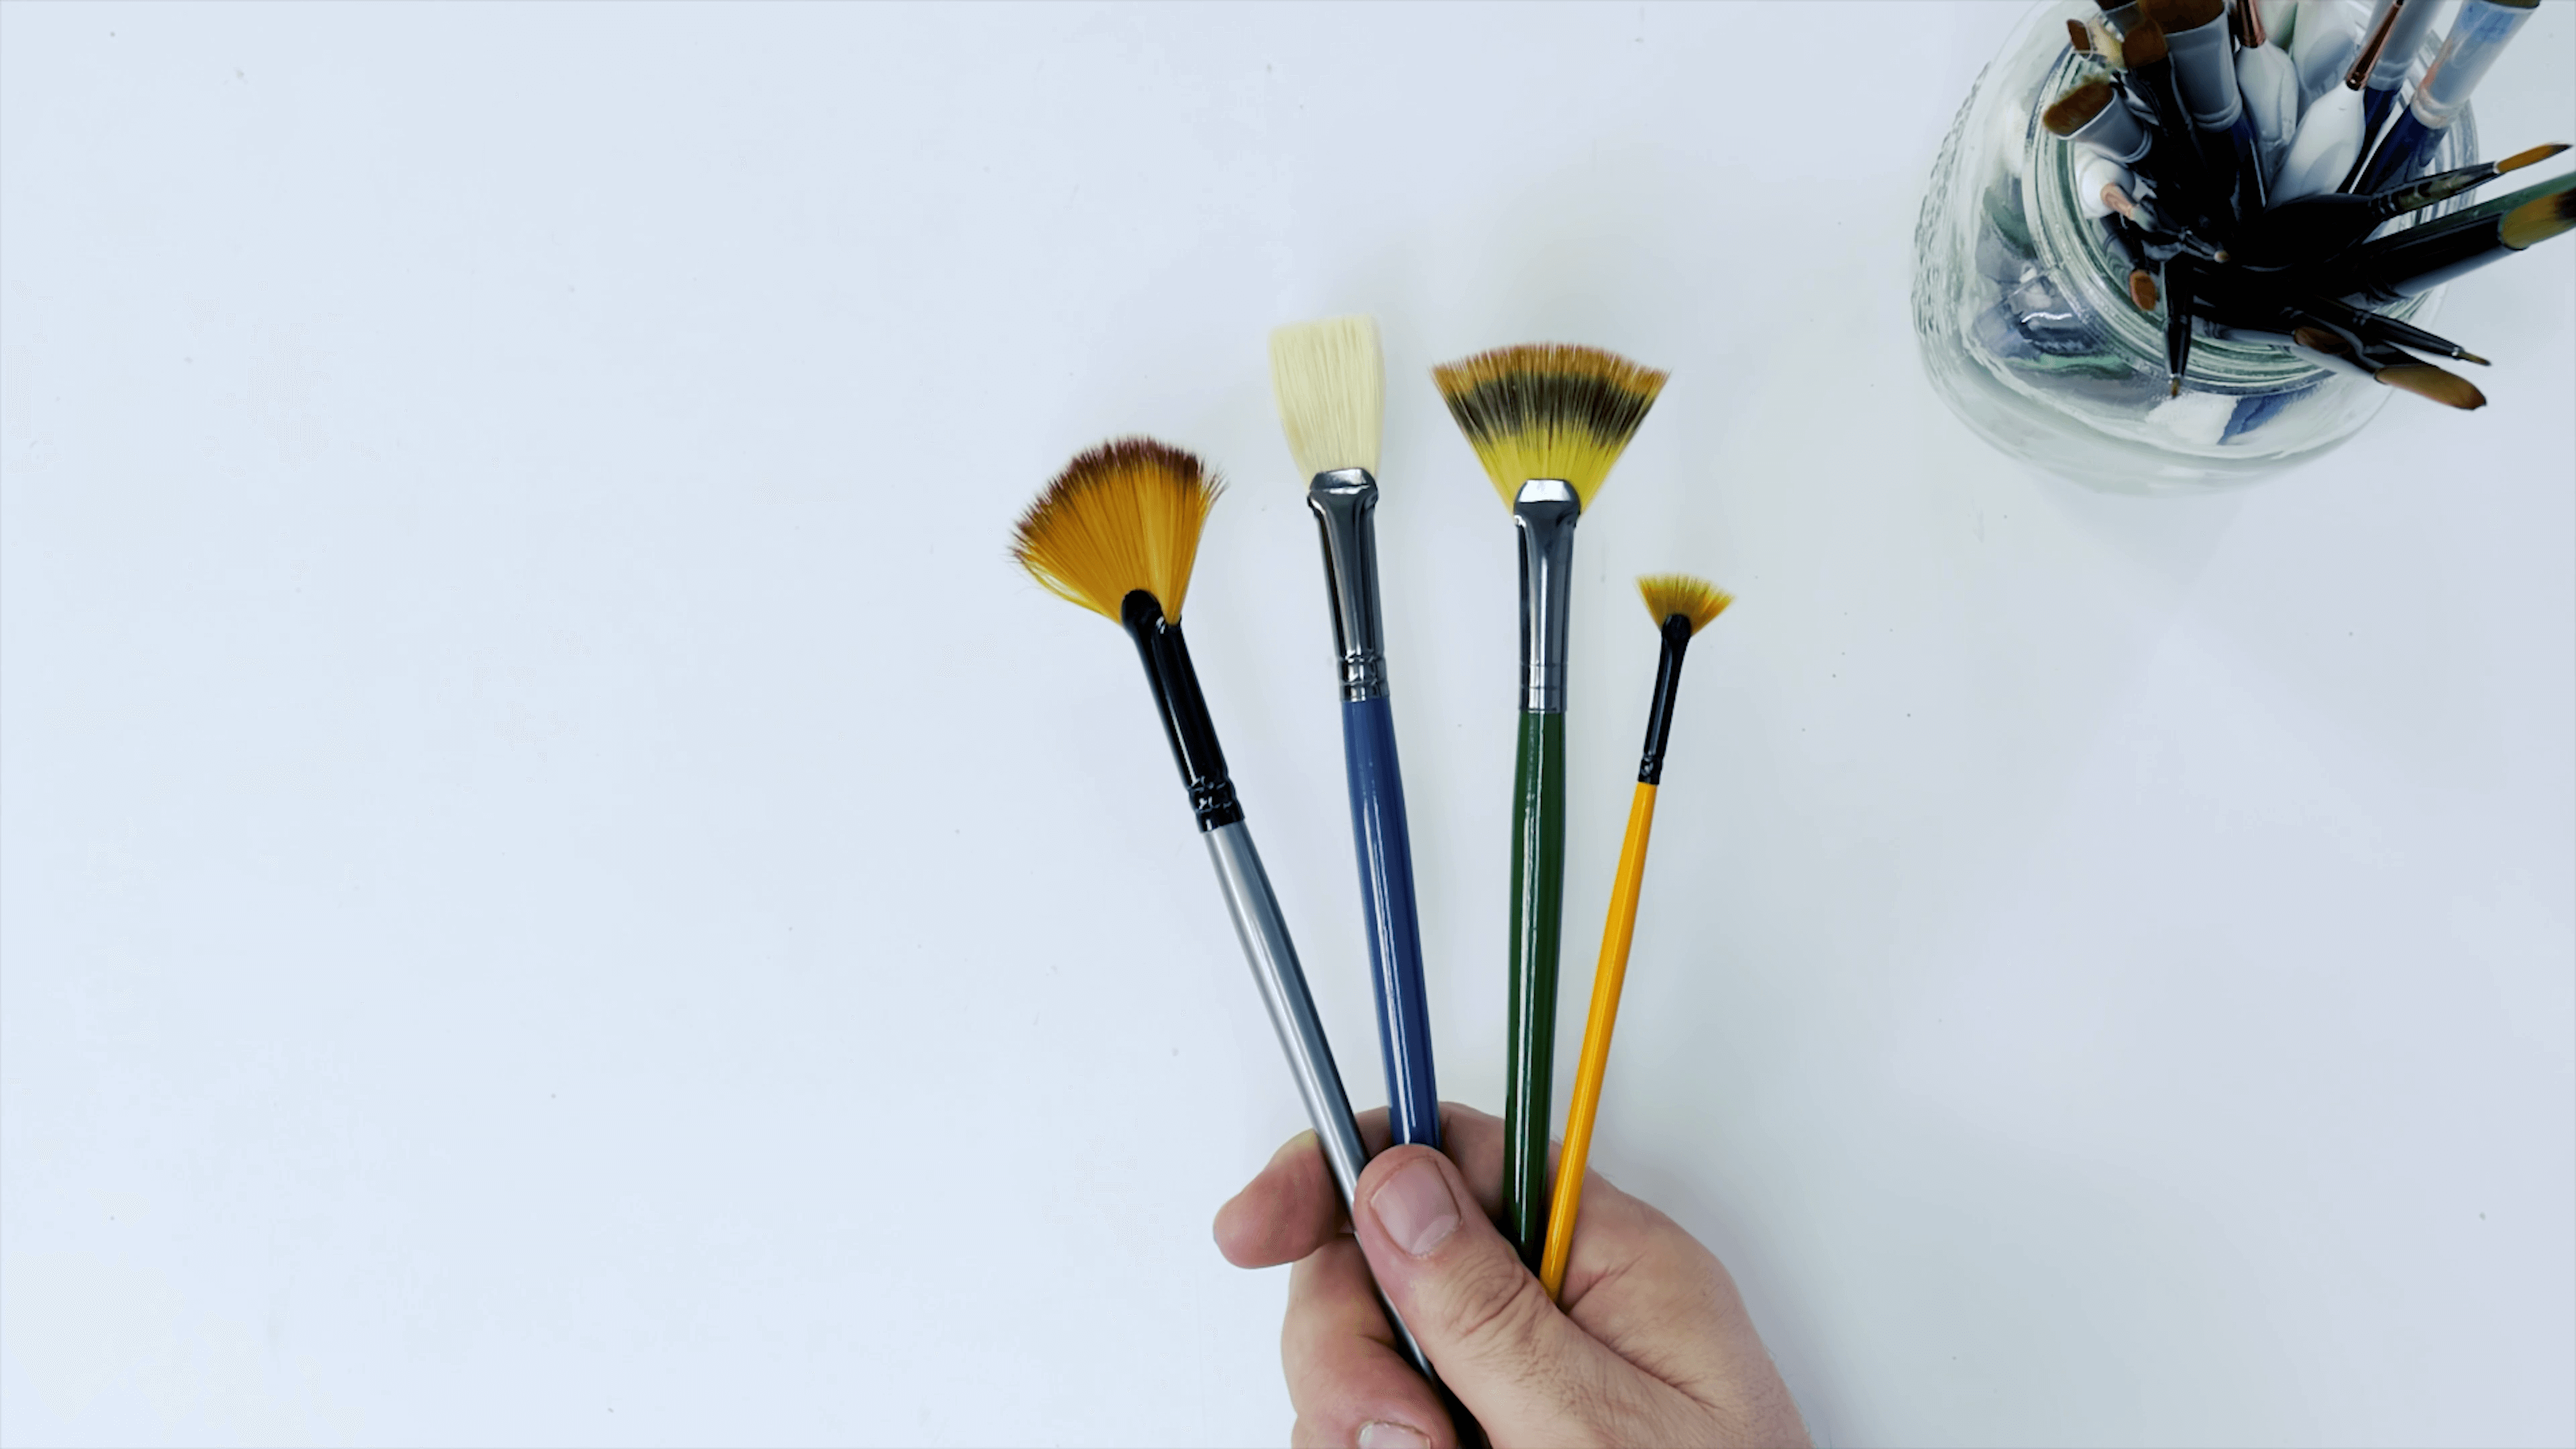 Four Mont Marte fan brushes held in hand.